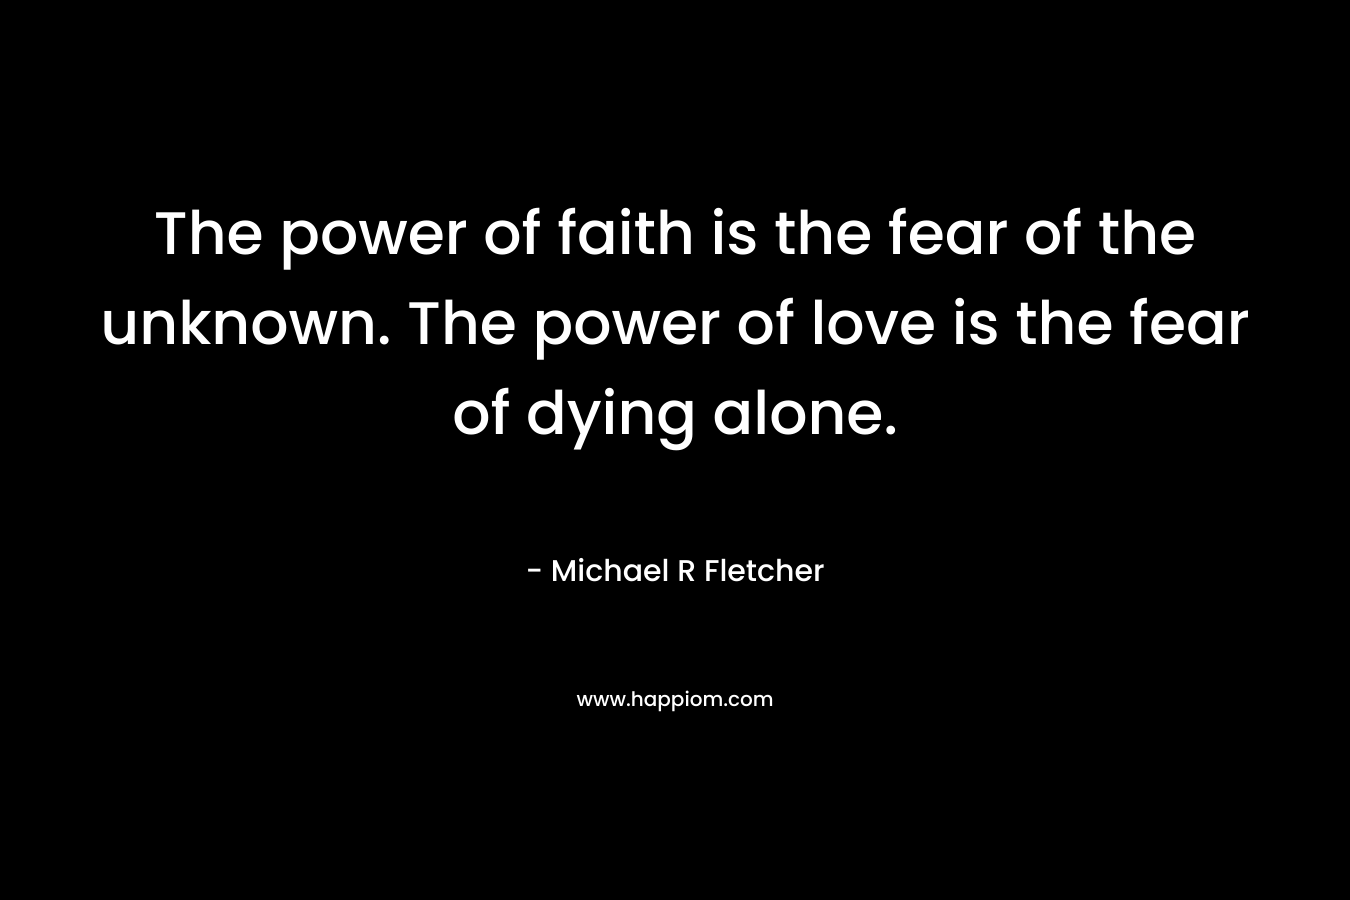 The power of faith is the fear of the unknown. The power of love is the fear of dying alone. – Michael R Fletcher